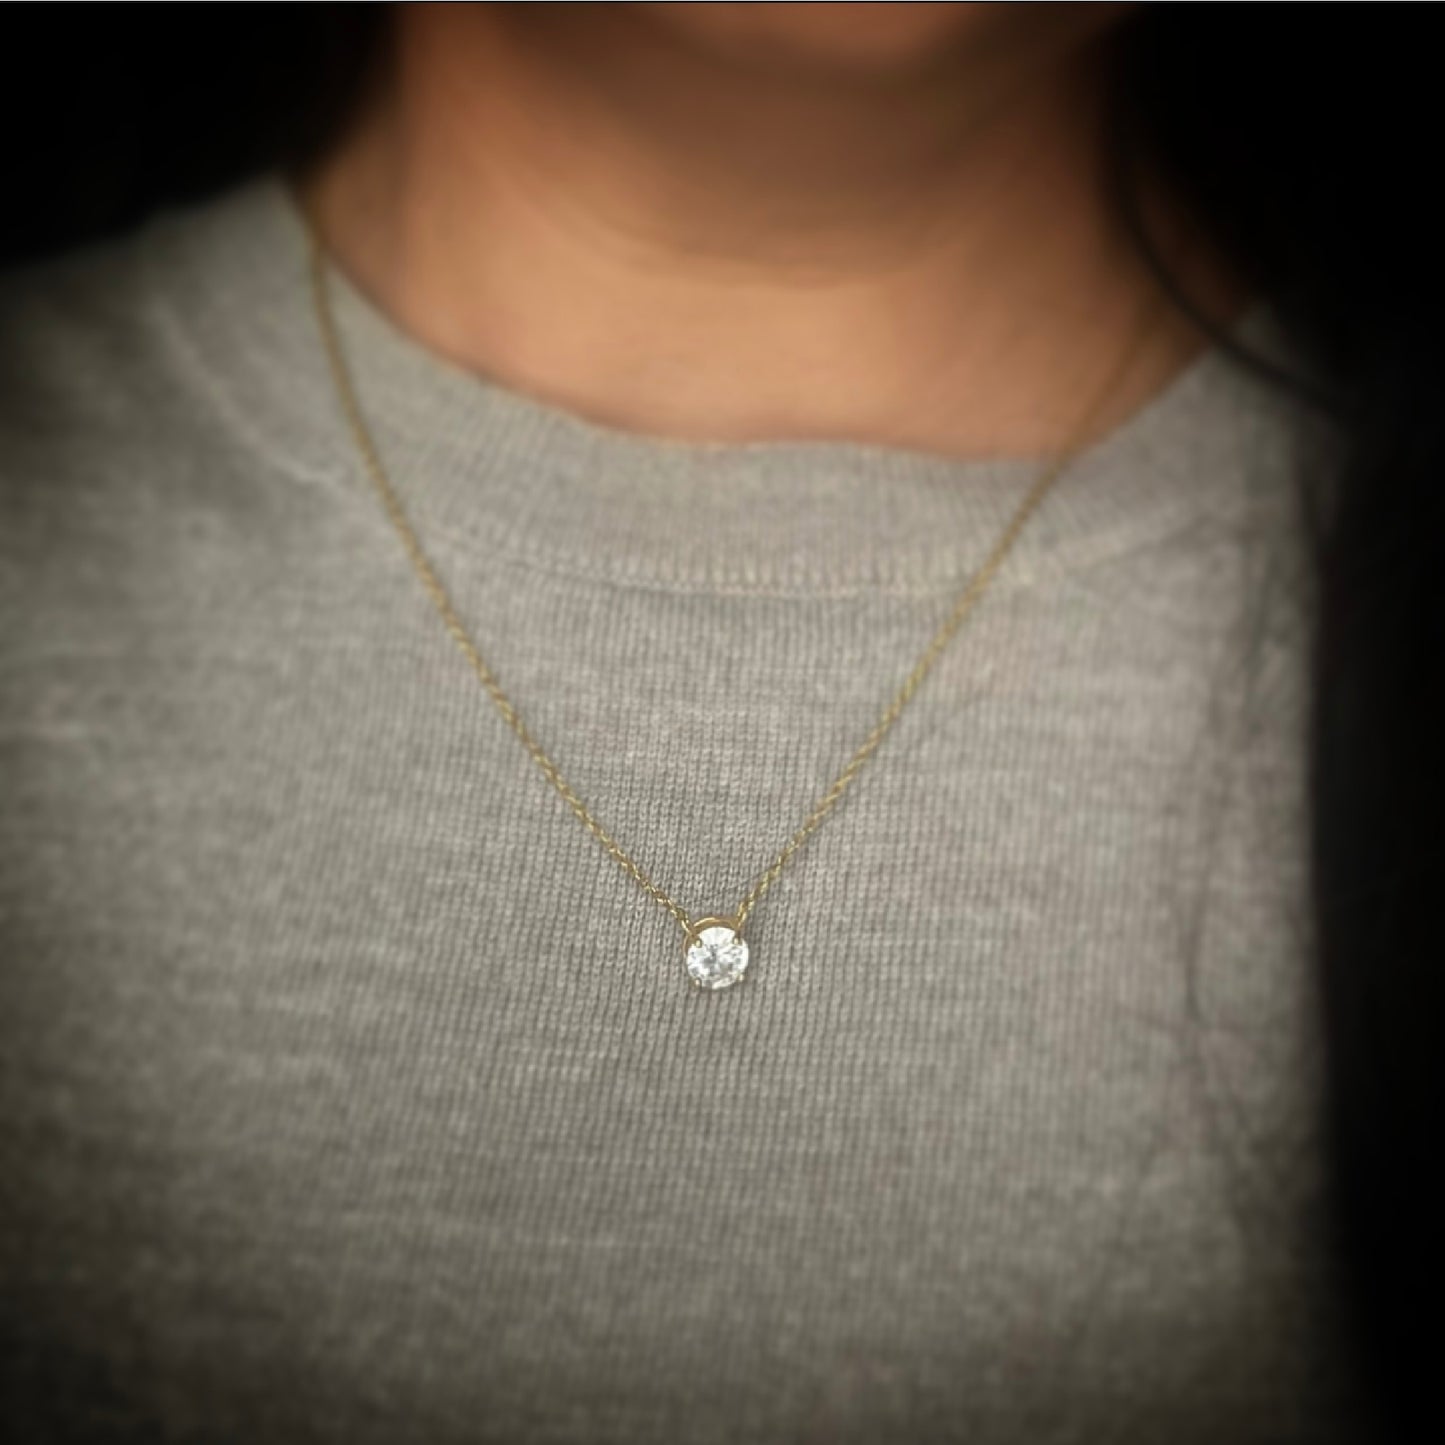 Gold-Plated Cubic Zirconia Necklace with Infused Ashes | Memorial Jewelry | Human Ashes, Pet Ashes, or Breast Milk | Custom Keepsake by The Farewell Collection